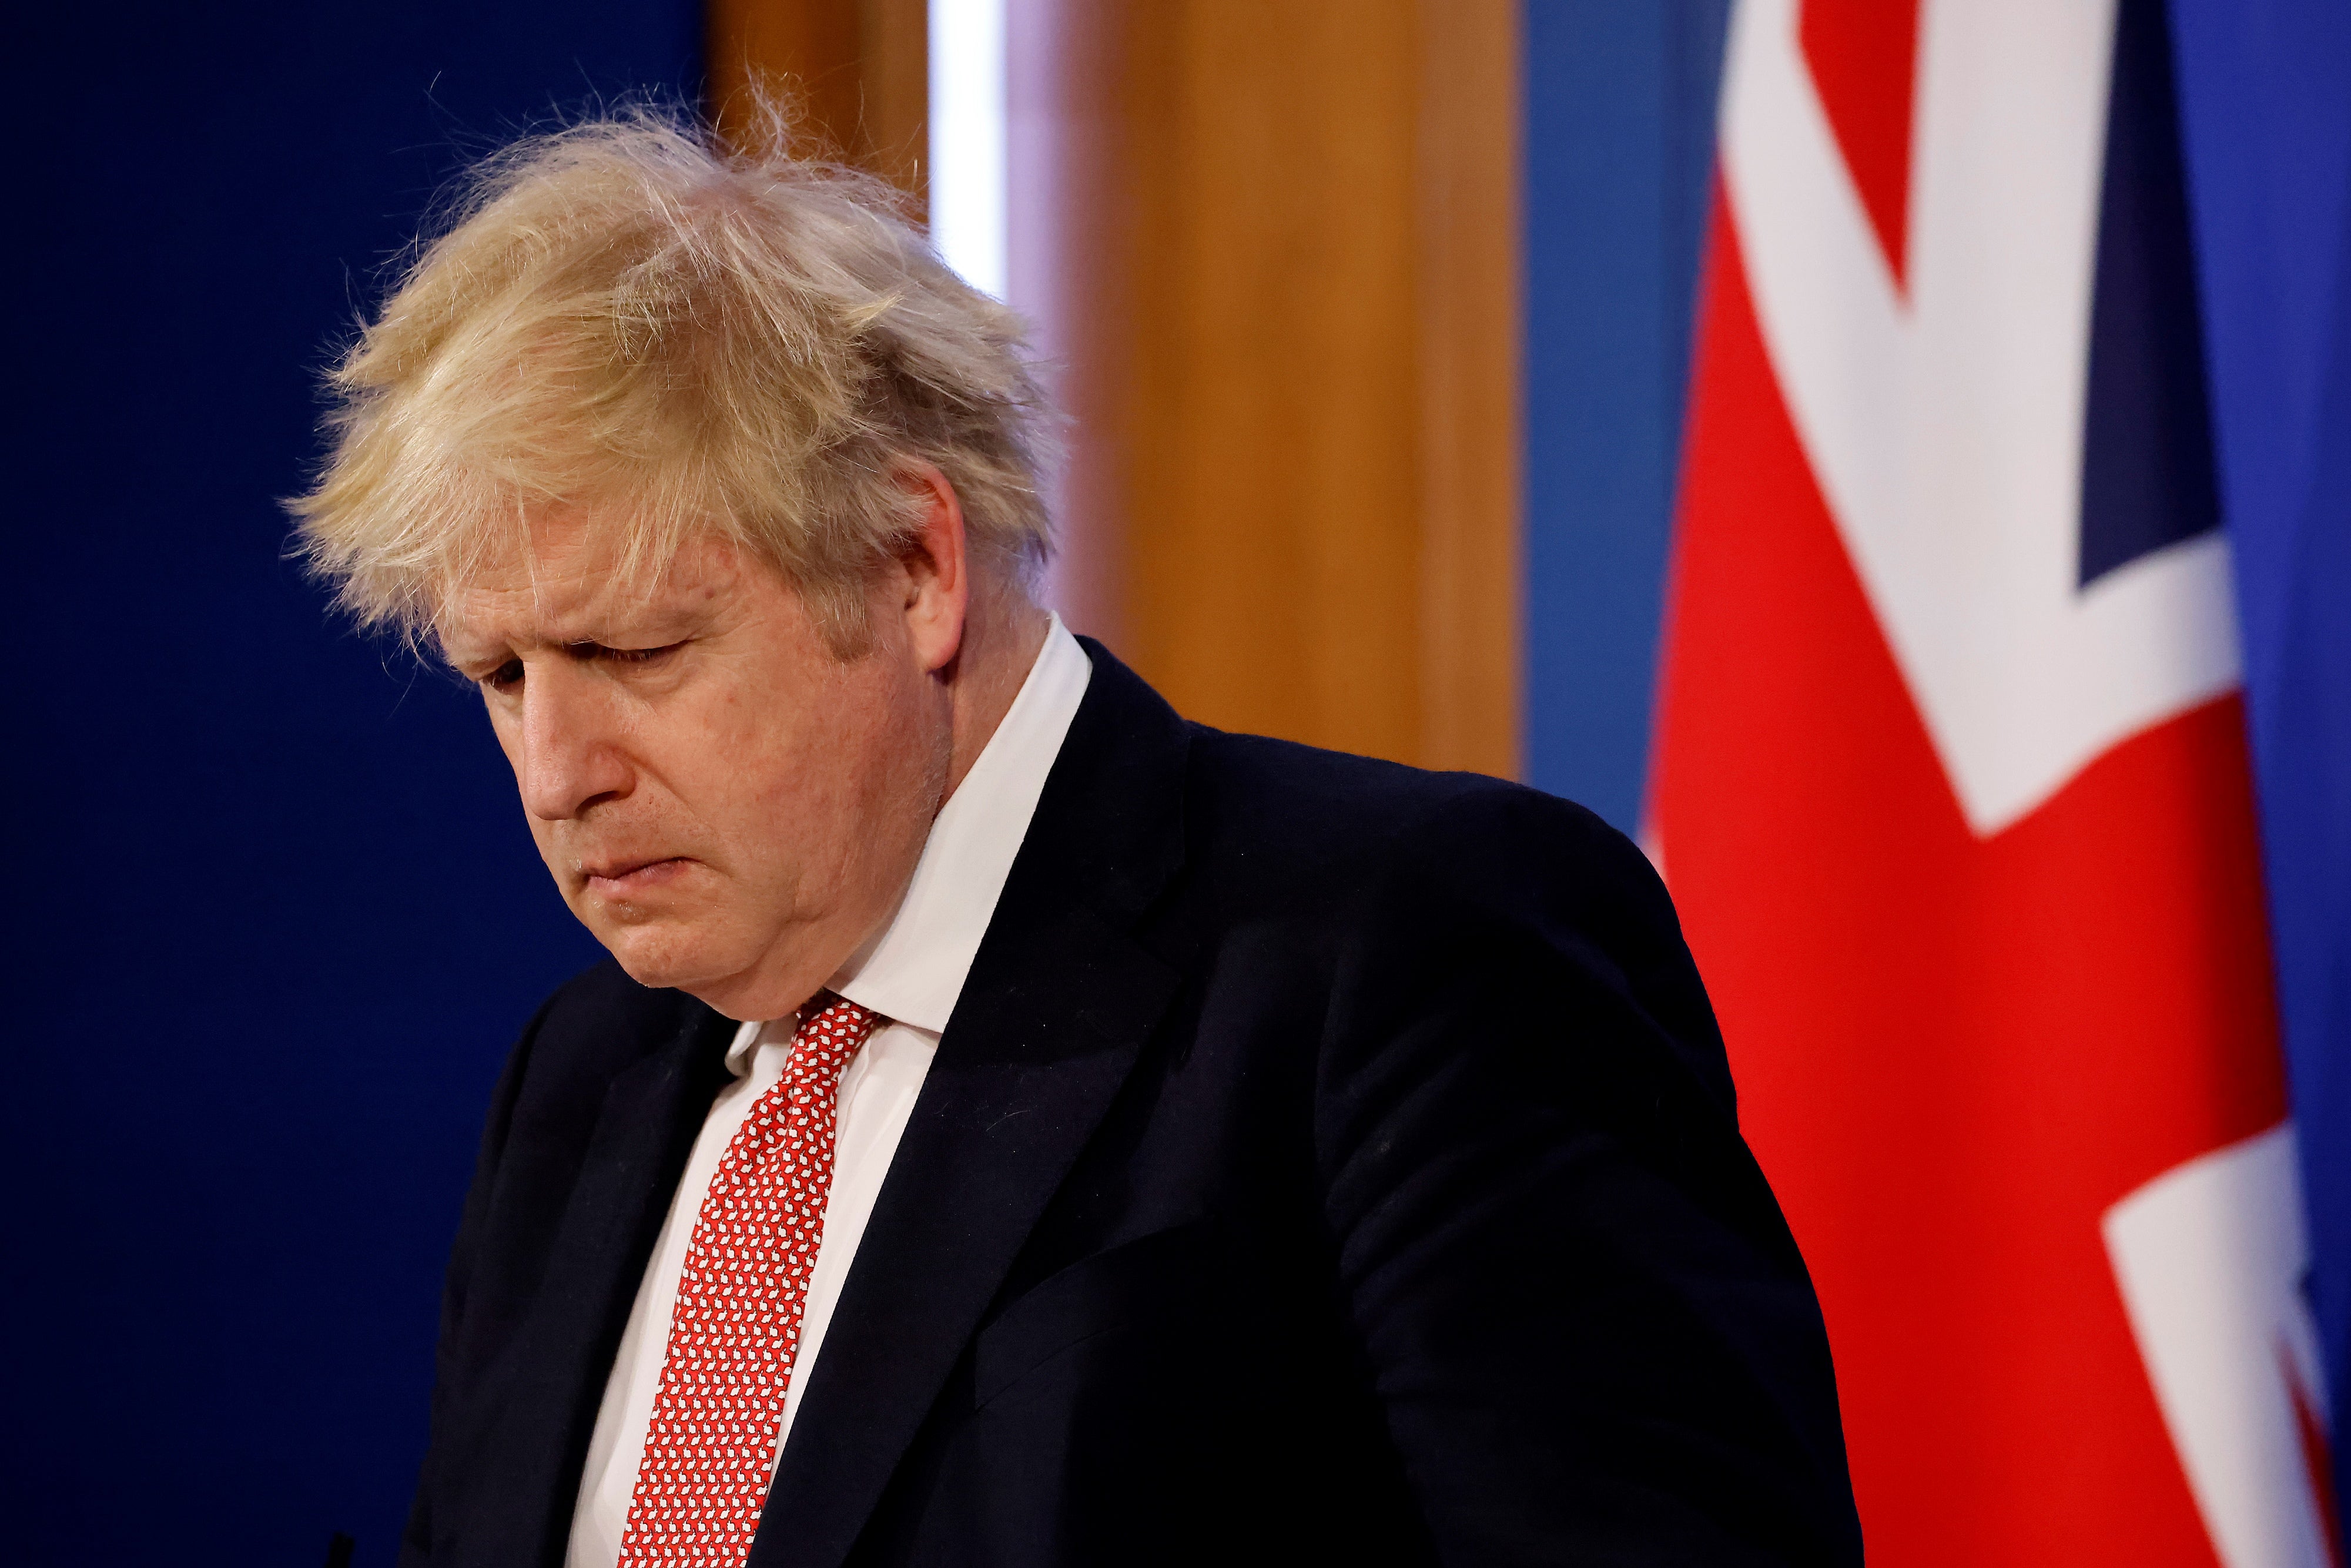 Prime Minister Boris Johnson during a media briefing in Downing Street, London, to outline the Government’s new long-term Covid-19 plan. Picture date: Monday February 21, 2022.